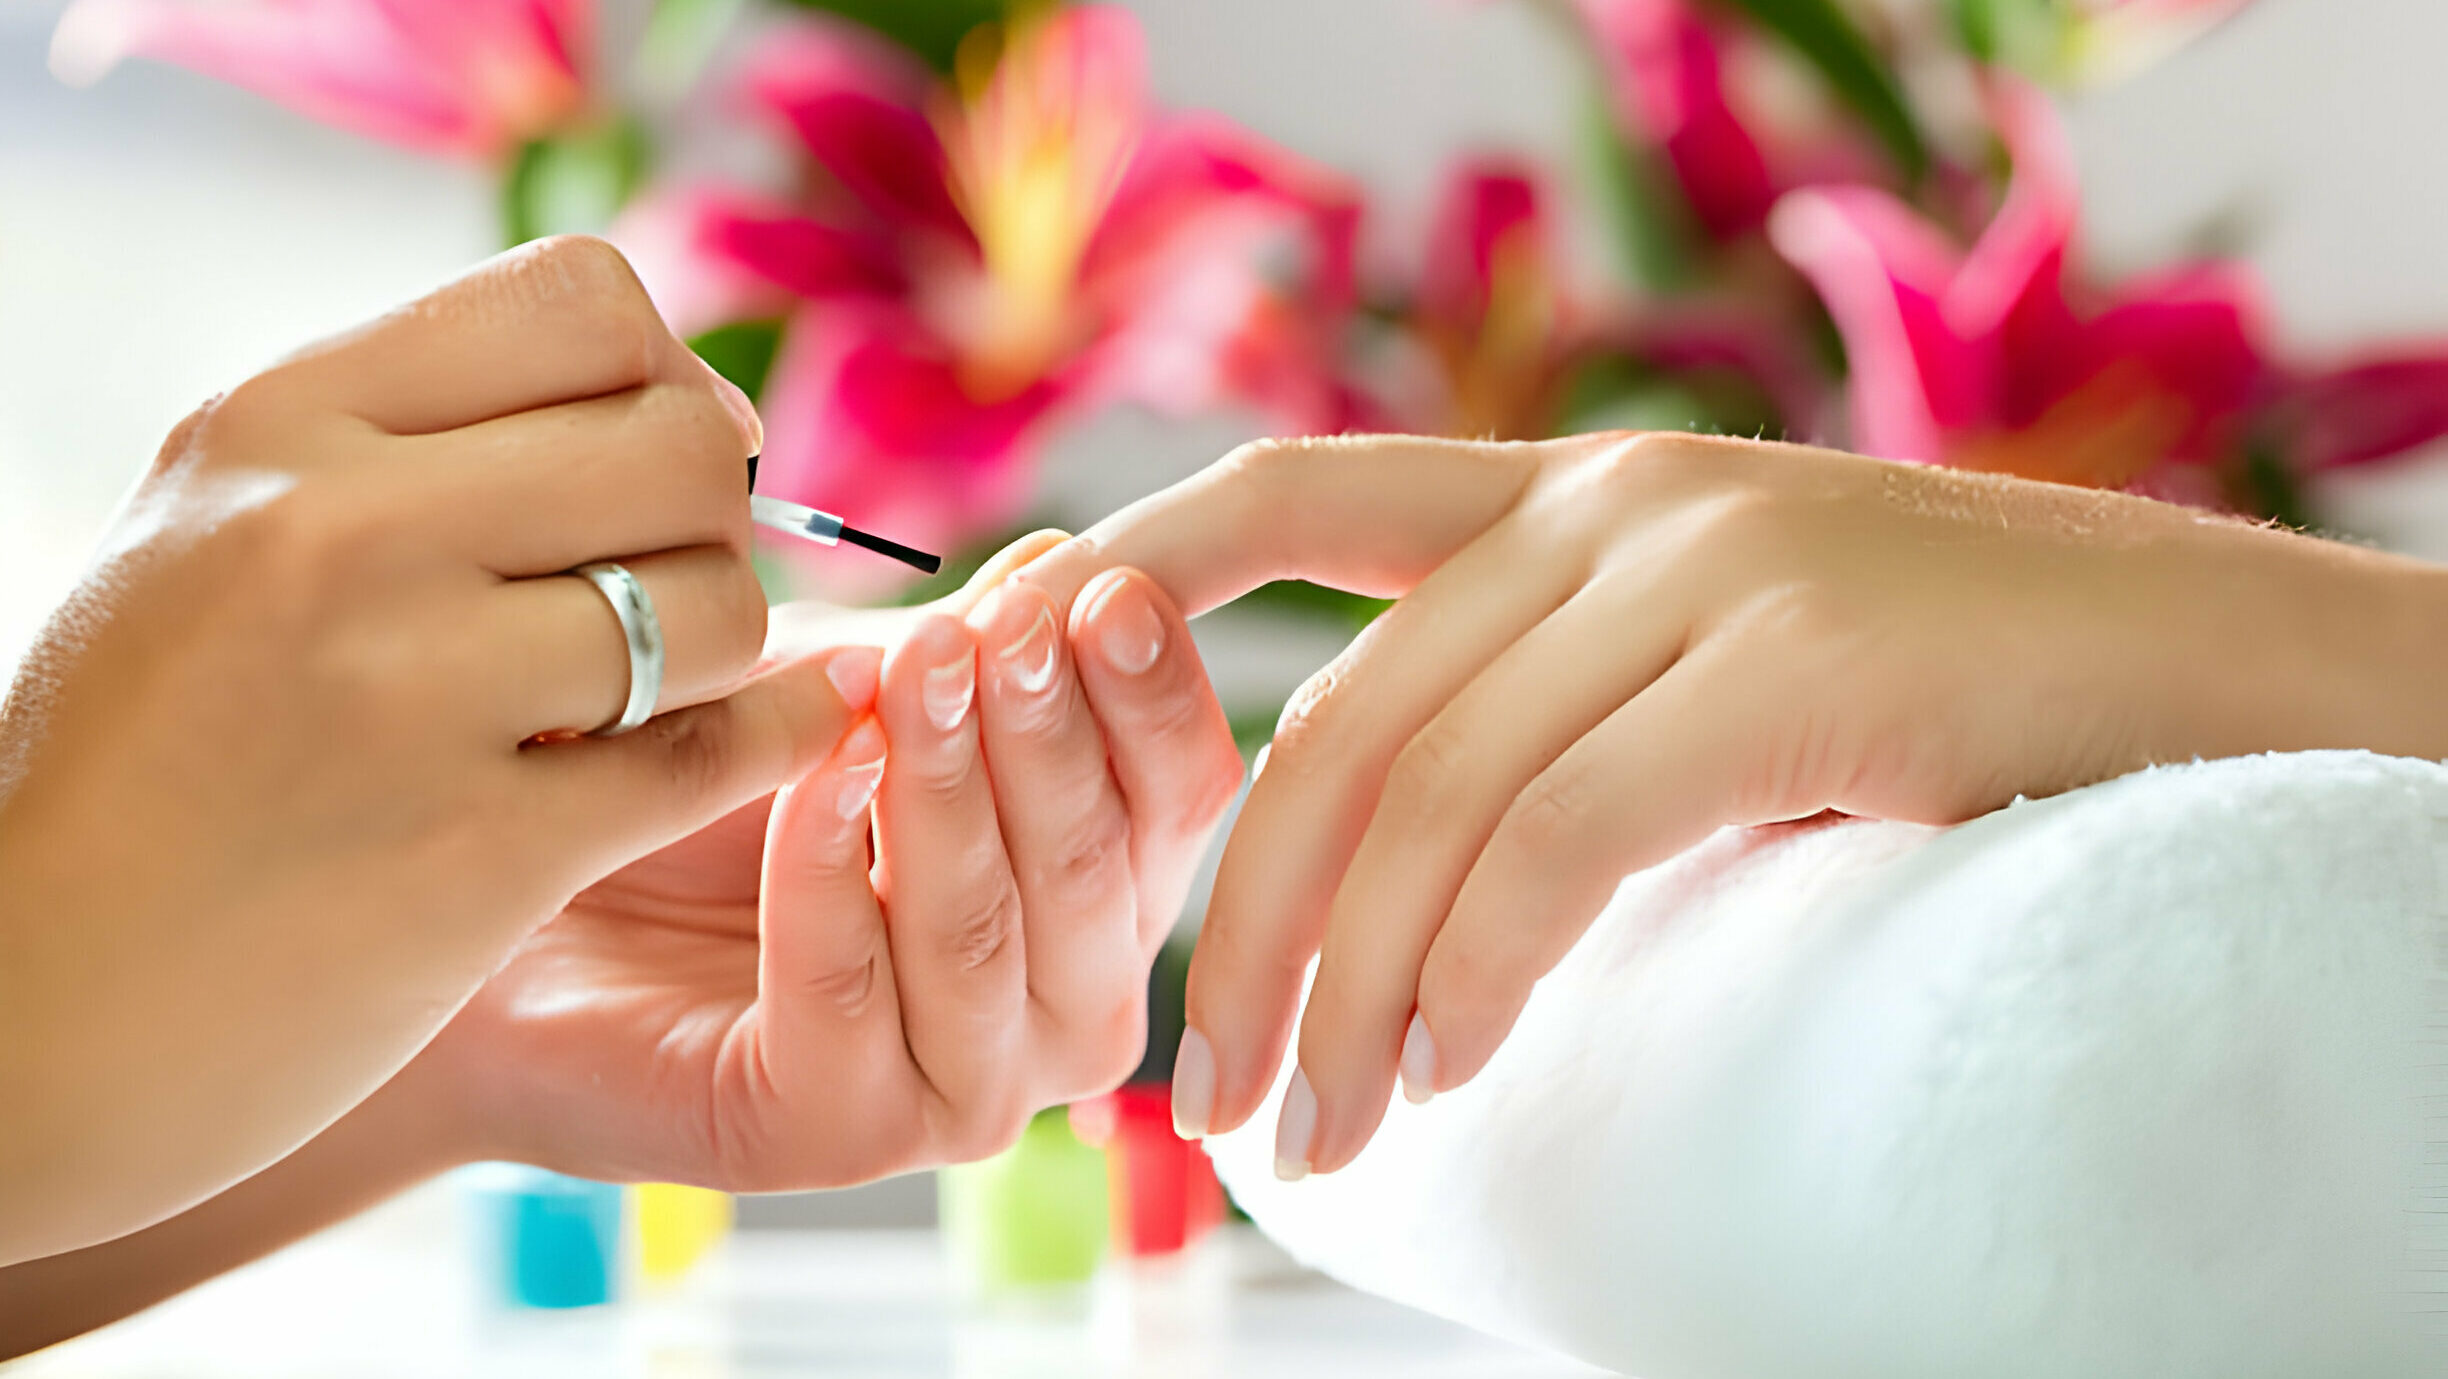 Nailshey7&beverlyhills Salón. - From $49.50 - Fort Lauderdale, FL | Groupon